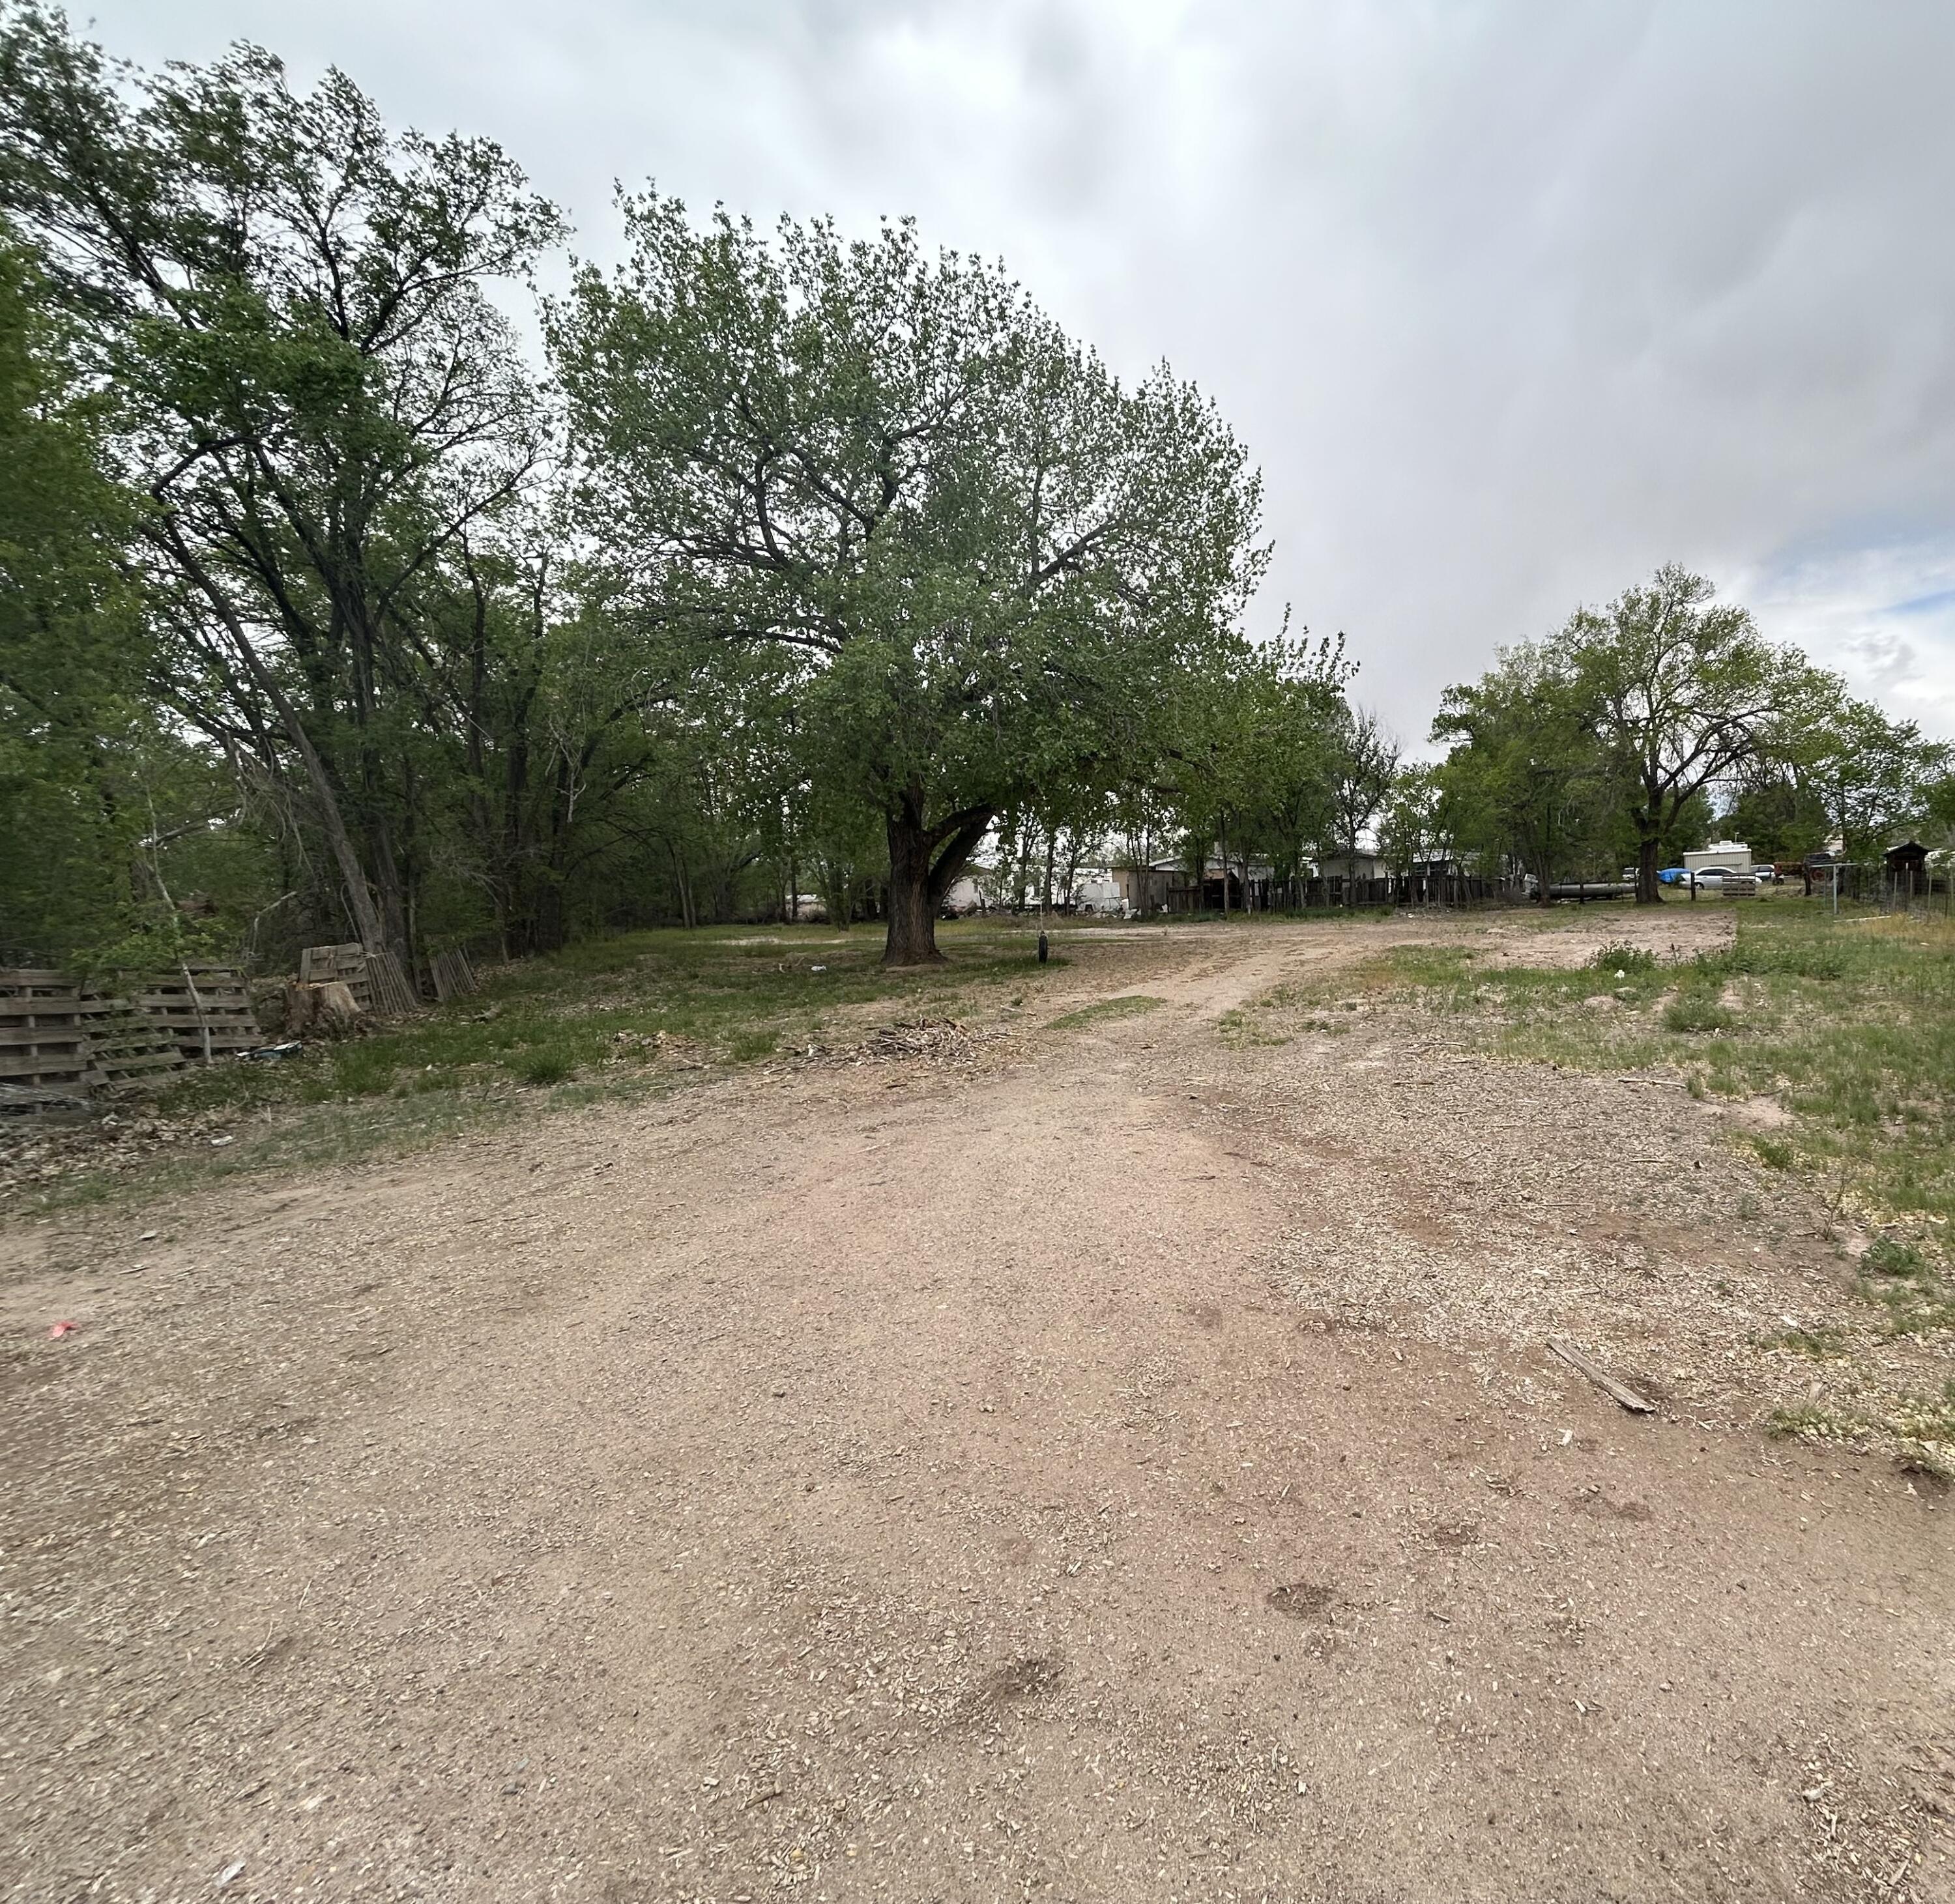 907 S First Street, Belen, New Mexico 87002, ,Land,For Sale,907 S First Street,1062187